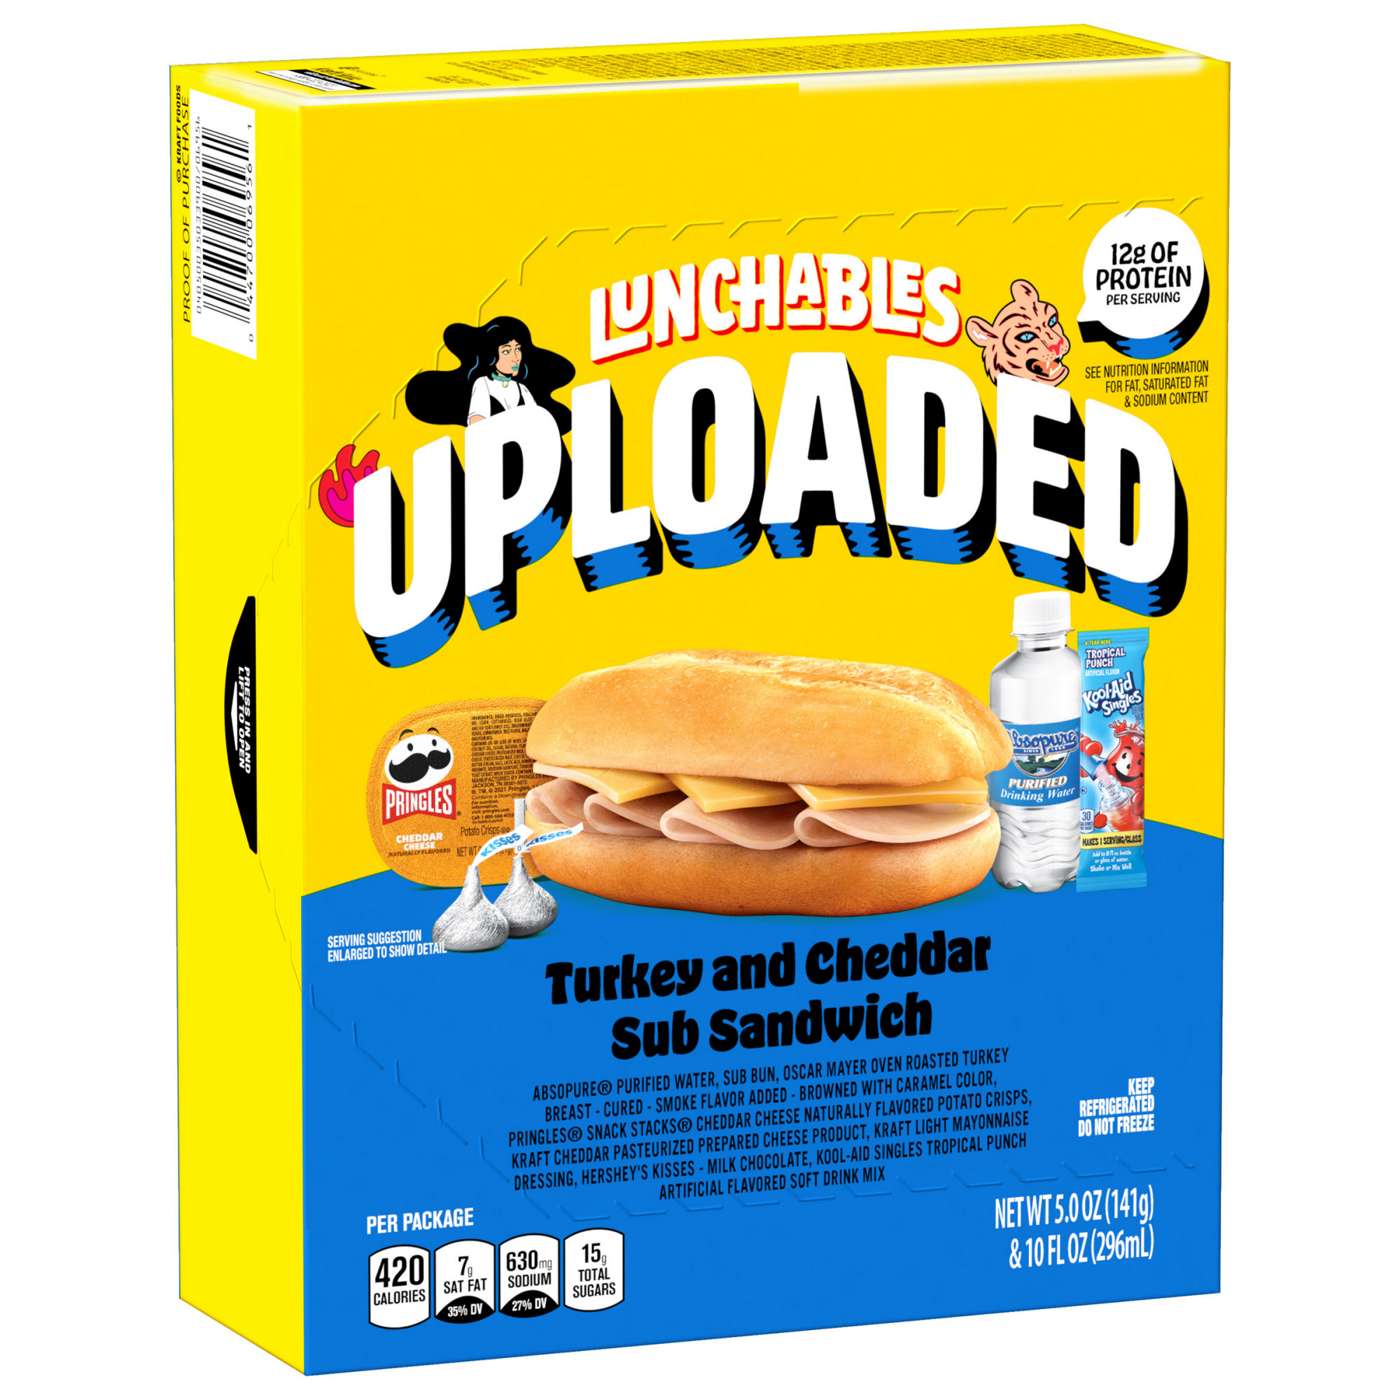 Lunchables Uploaded Meal Kit - Turkey & Cheddar Cheese Sub Sandwich; image 3 of 3